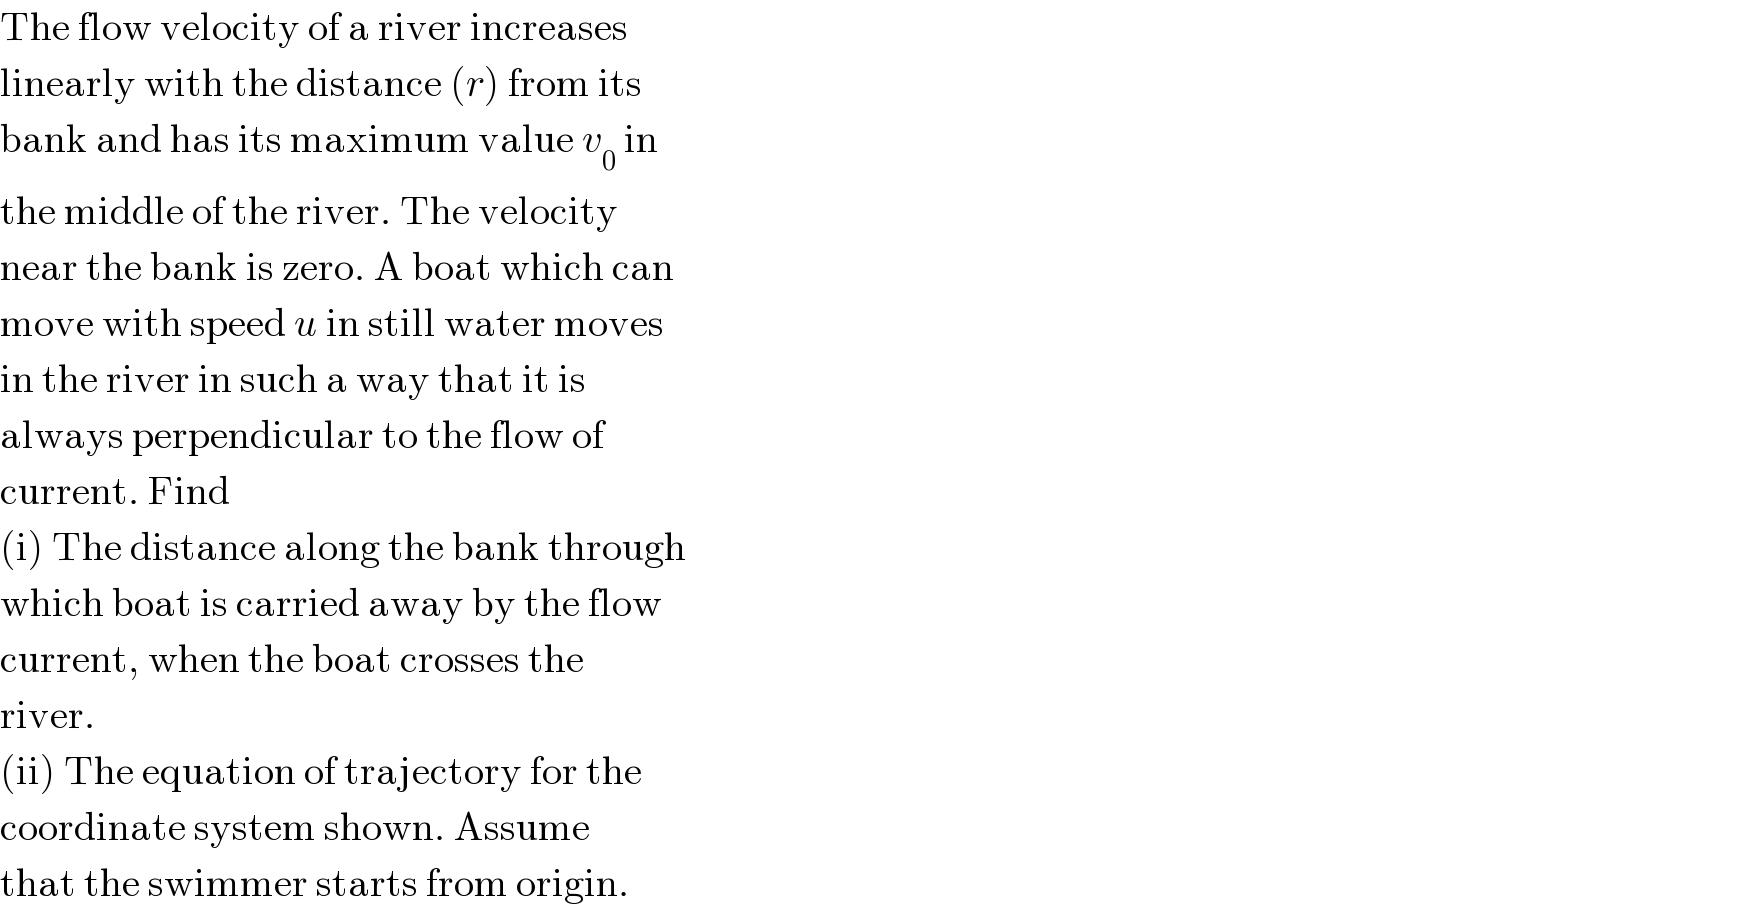 The flow velocity of a river increases  linearly with the distance (r) from its  bank and has its maximum value v_0  in  the middle of the river. The velocity  near the bank is zero. A boat which can  move with speed u in still water moves  in the river in such a way that it is  always perpendicular to the flow of  current. Find  (i) The distance along the bank through  which boat is carried away by the flow  current, when the boat crosses the  river.  (ii) The equation of trajectory for the  coordinate system shown. Assume  that the swimmer starts from origin.  